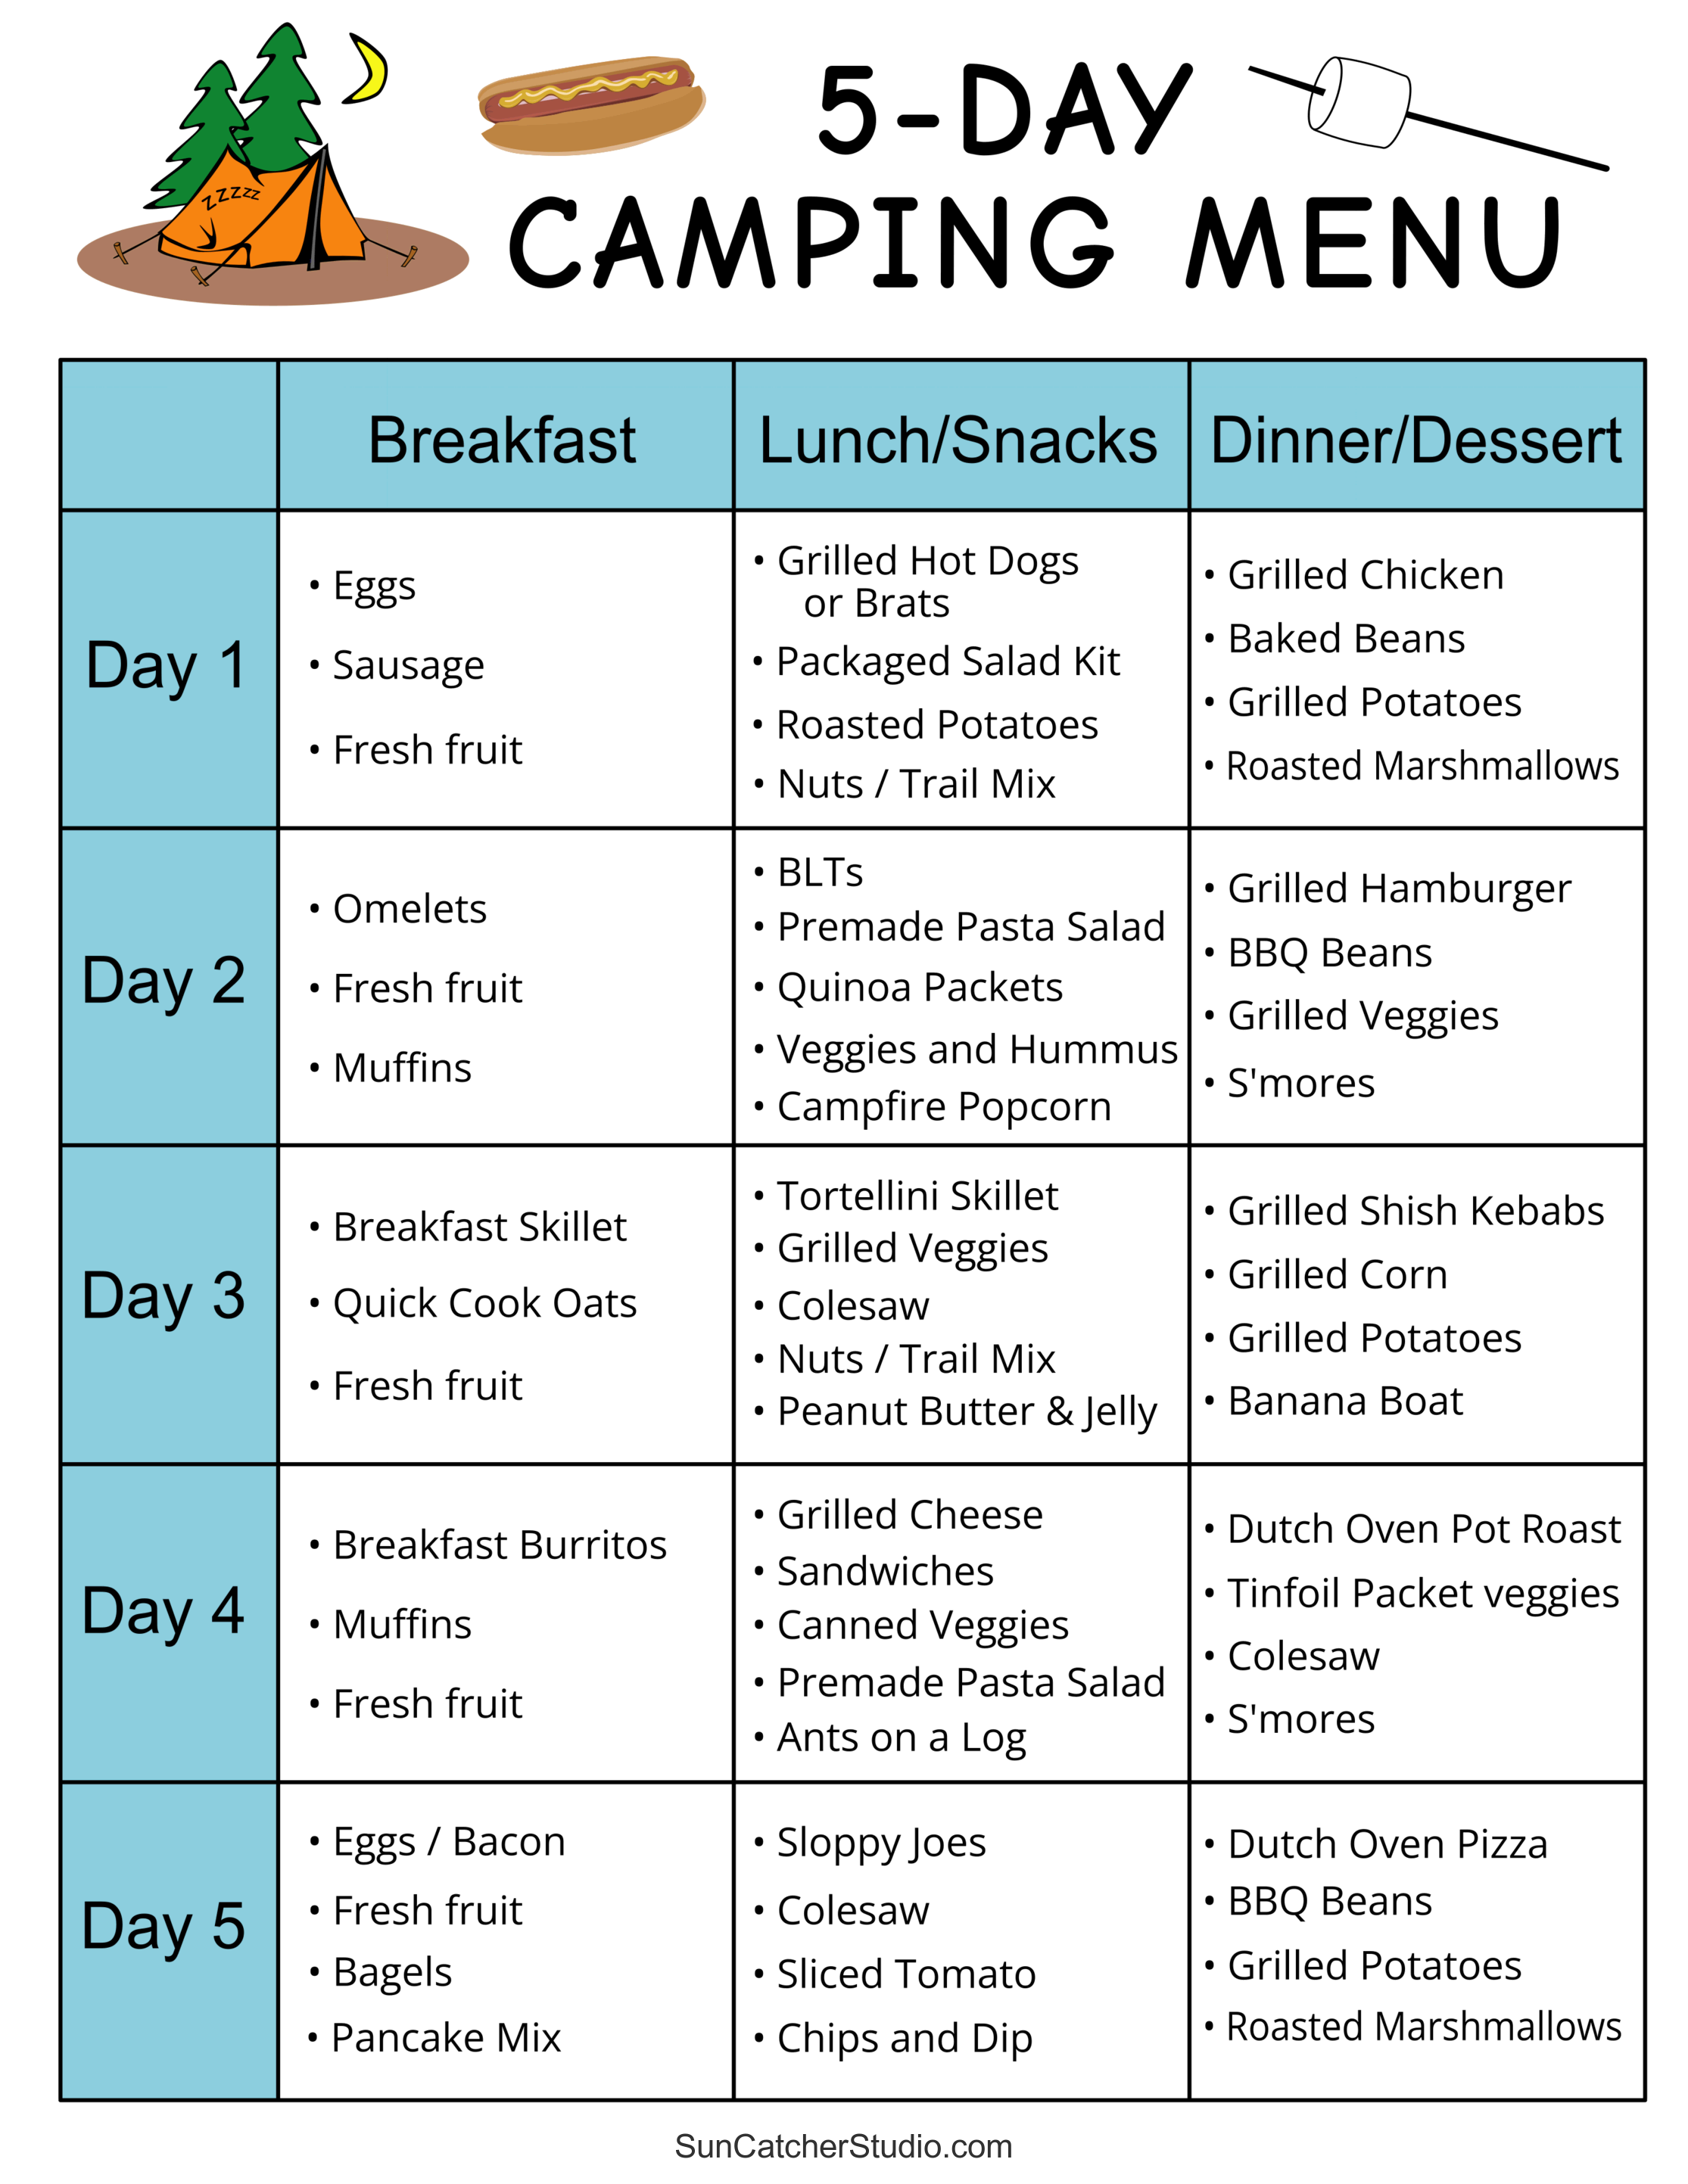 Camping Food List and Meal Planning Tips (+ free printable checklist!) -  Fresh Off The Grid